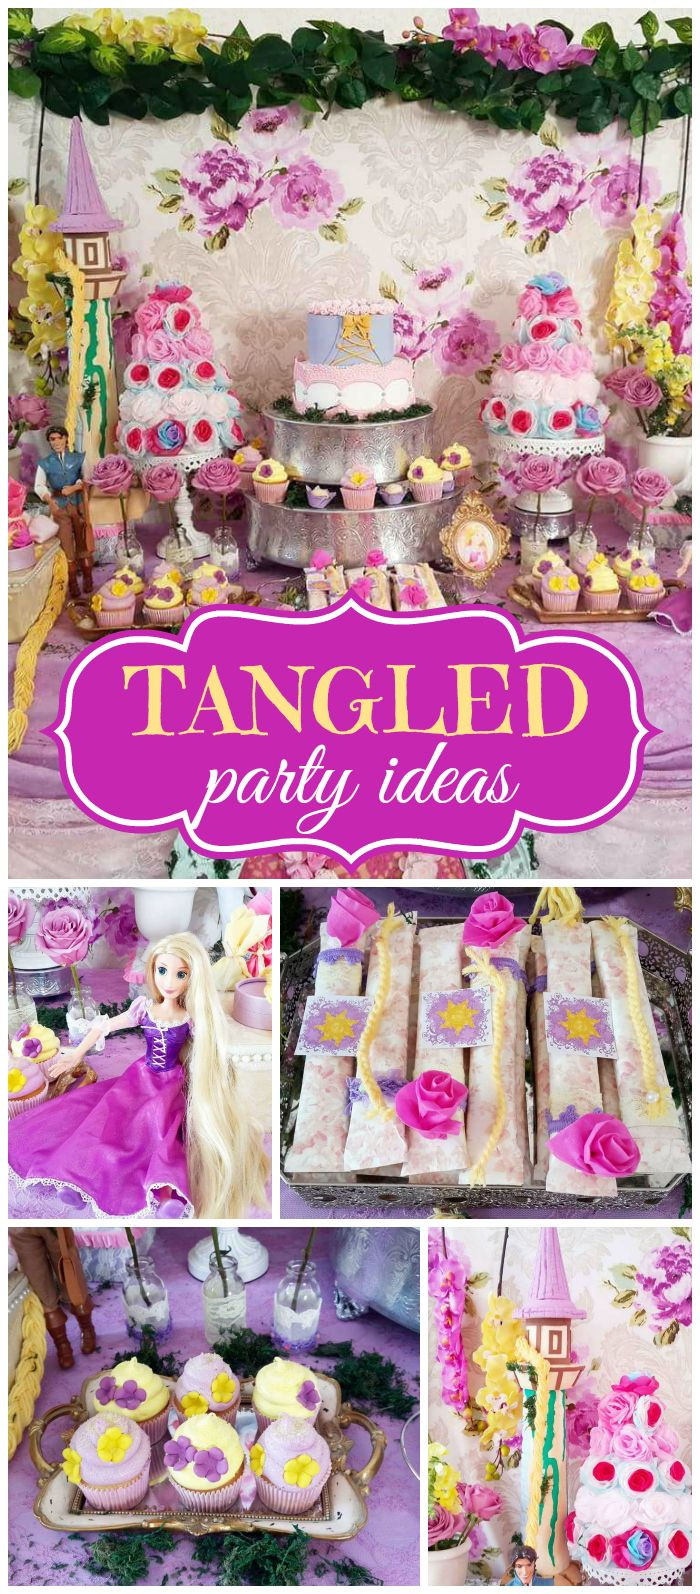 Rapunzel Birthday Party Decorations
 162 best images about Rapunzel Tangled Party Ideas on